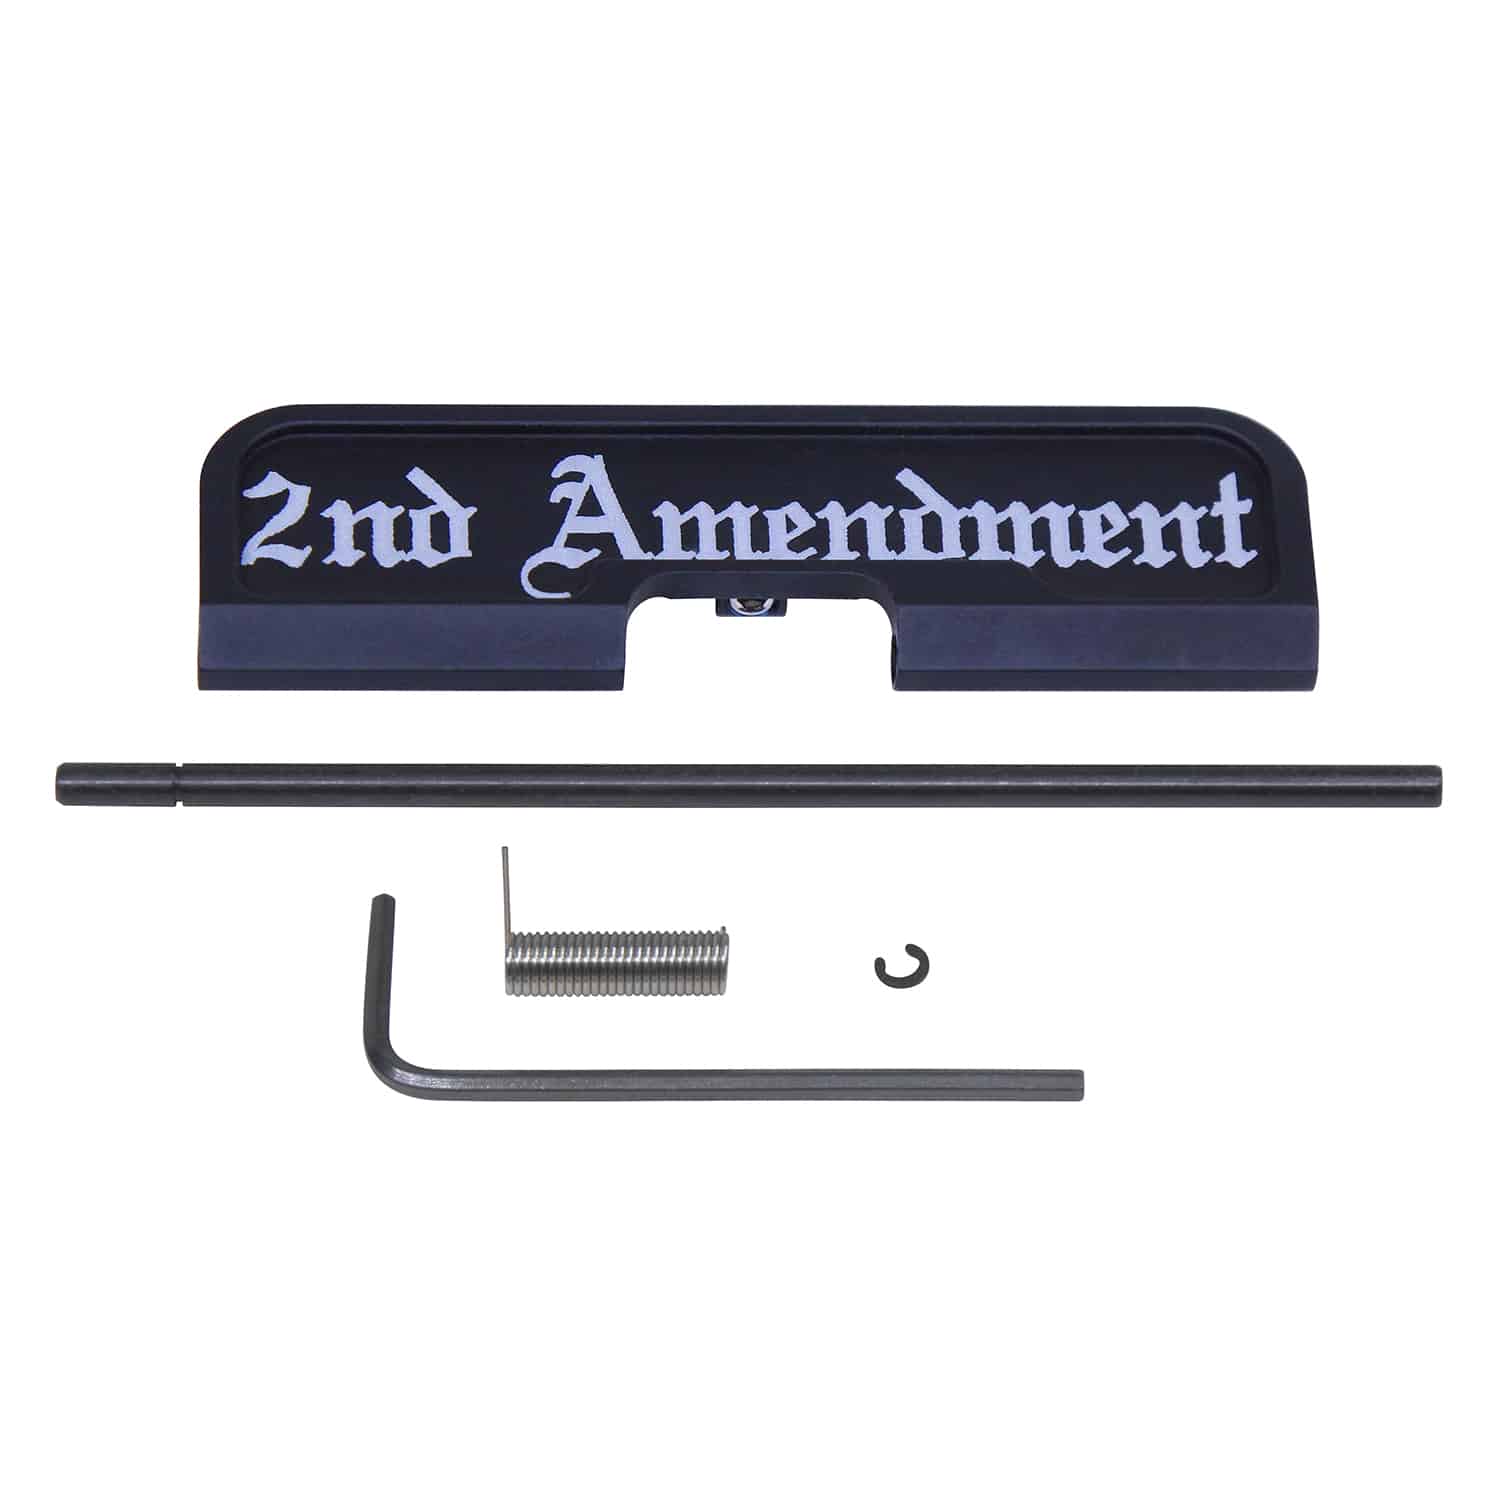 AR-15 Ejection Port Dust Cover Gen 3 '2nd Amendment' Lasered in Anodized Black